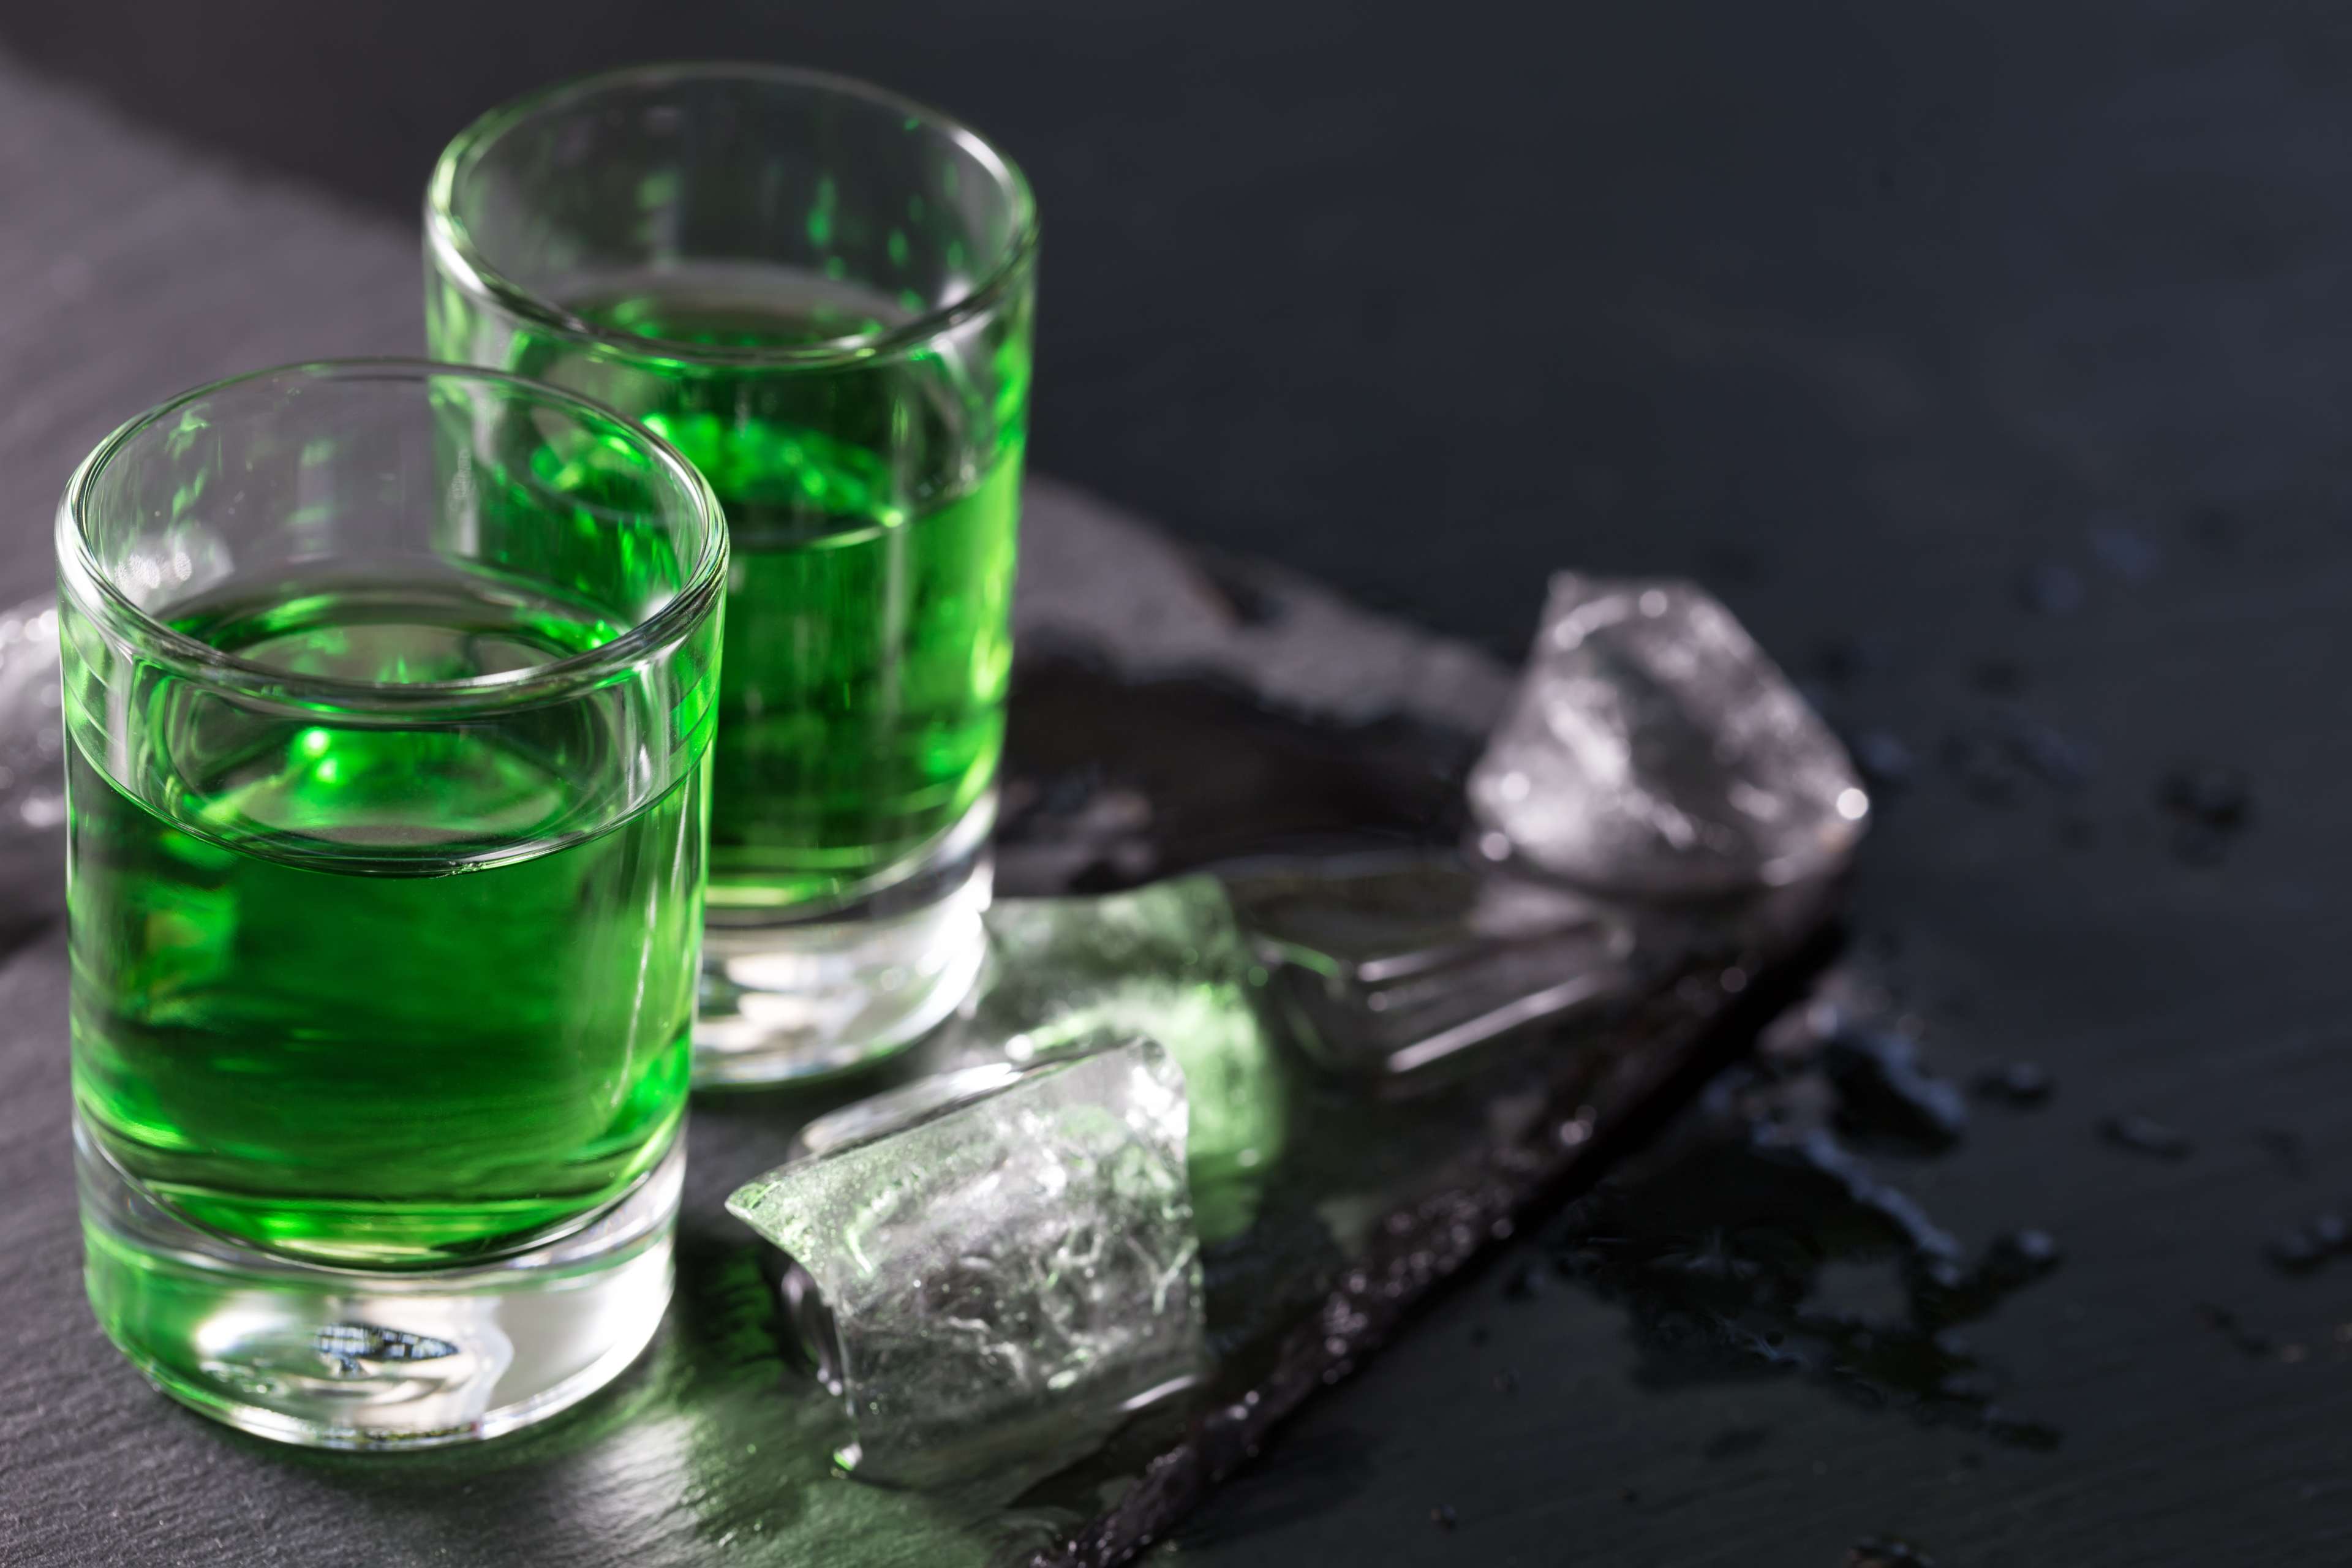 61a9436d426d8e04444b05d2_Two%20glasses%20of%20absinthe%20and%20melted%20ice%20cubes.jpeg